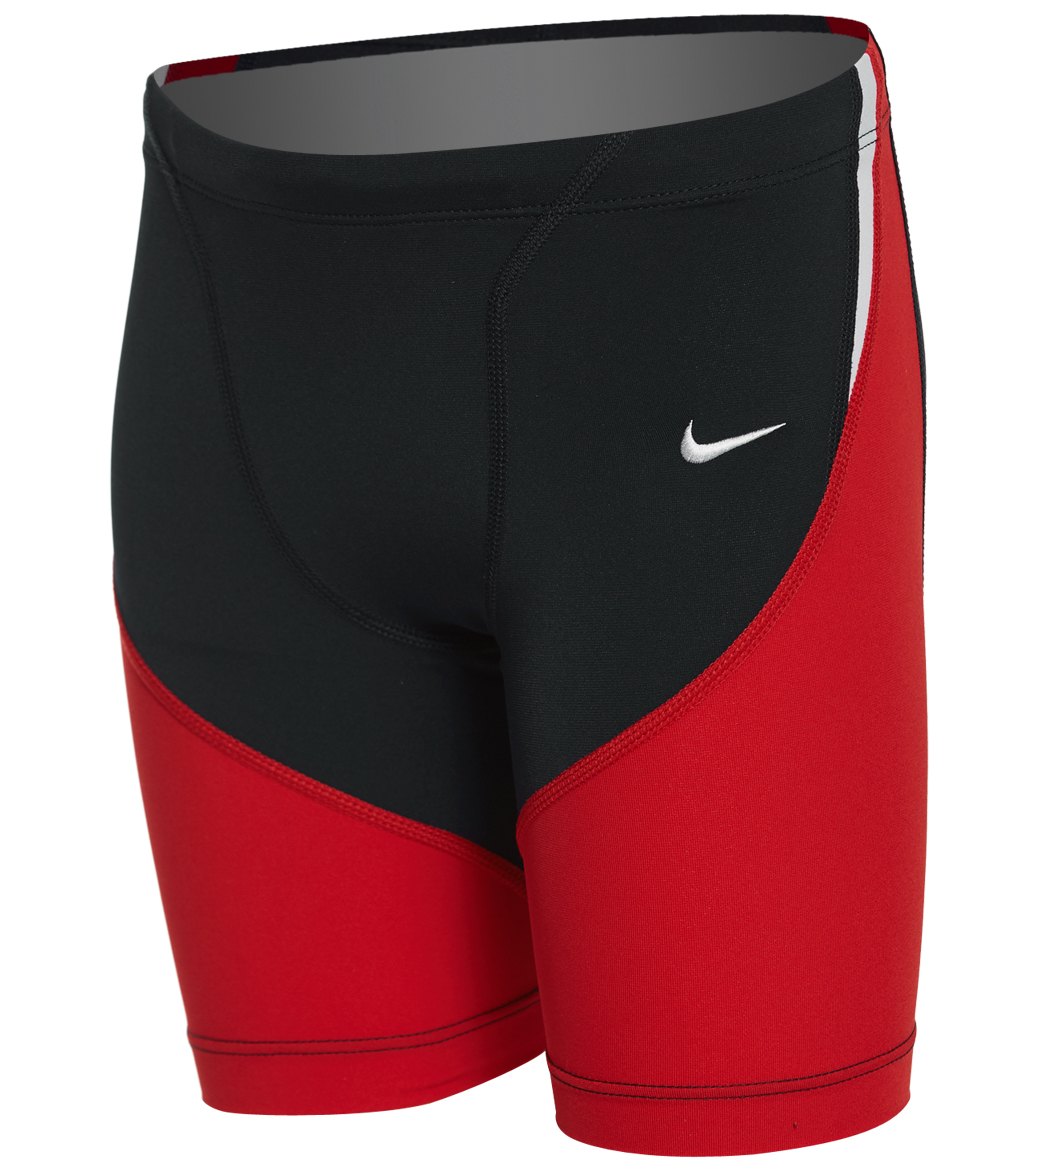 Nike Boy's Color Surge Jammer Swimsuit - University Red 22 Polyester/Spandex - Swimoutlet.com